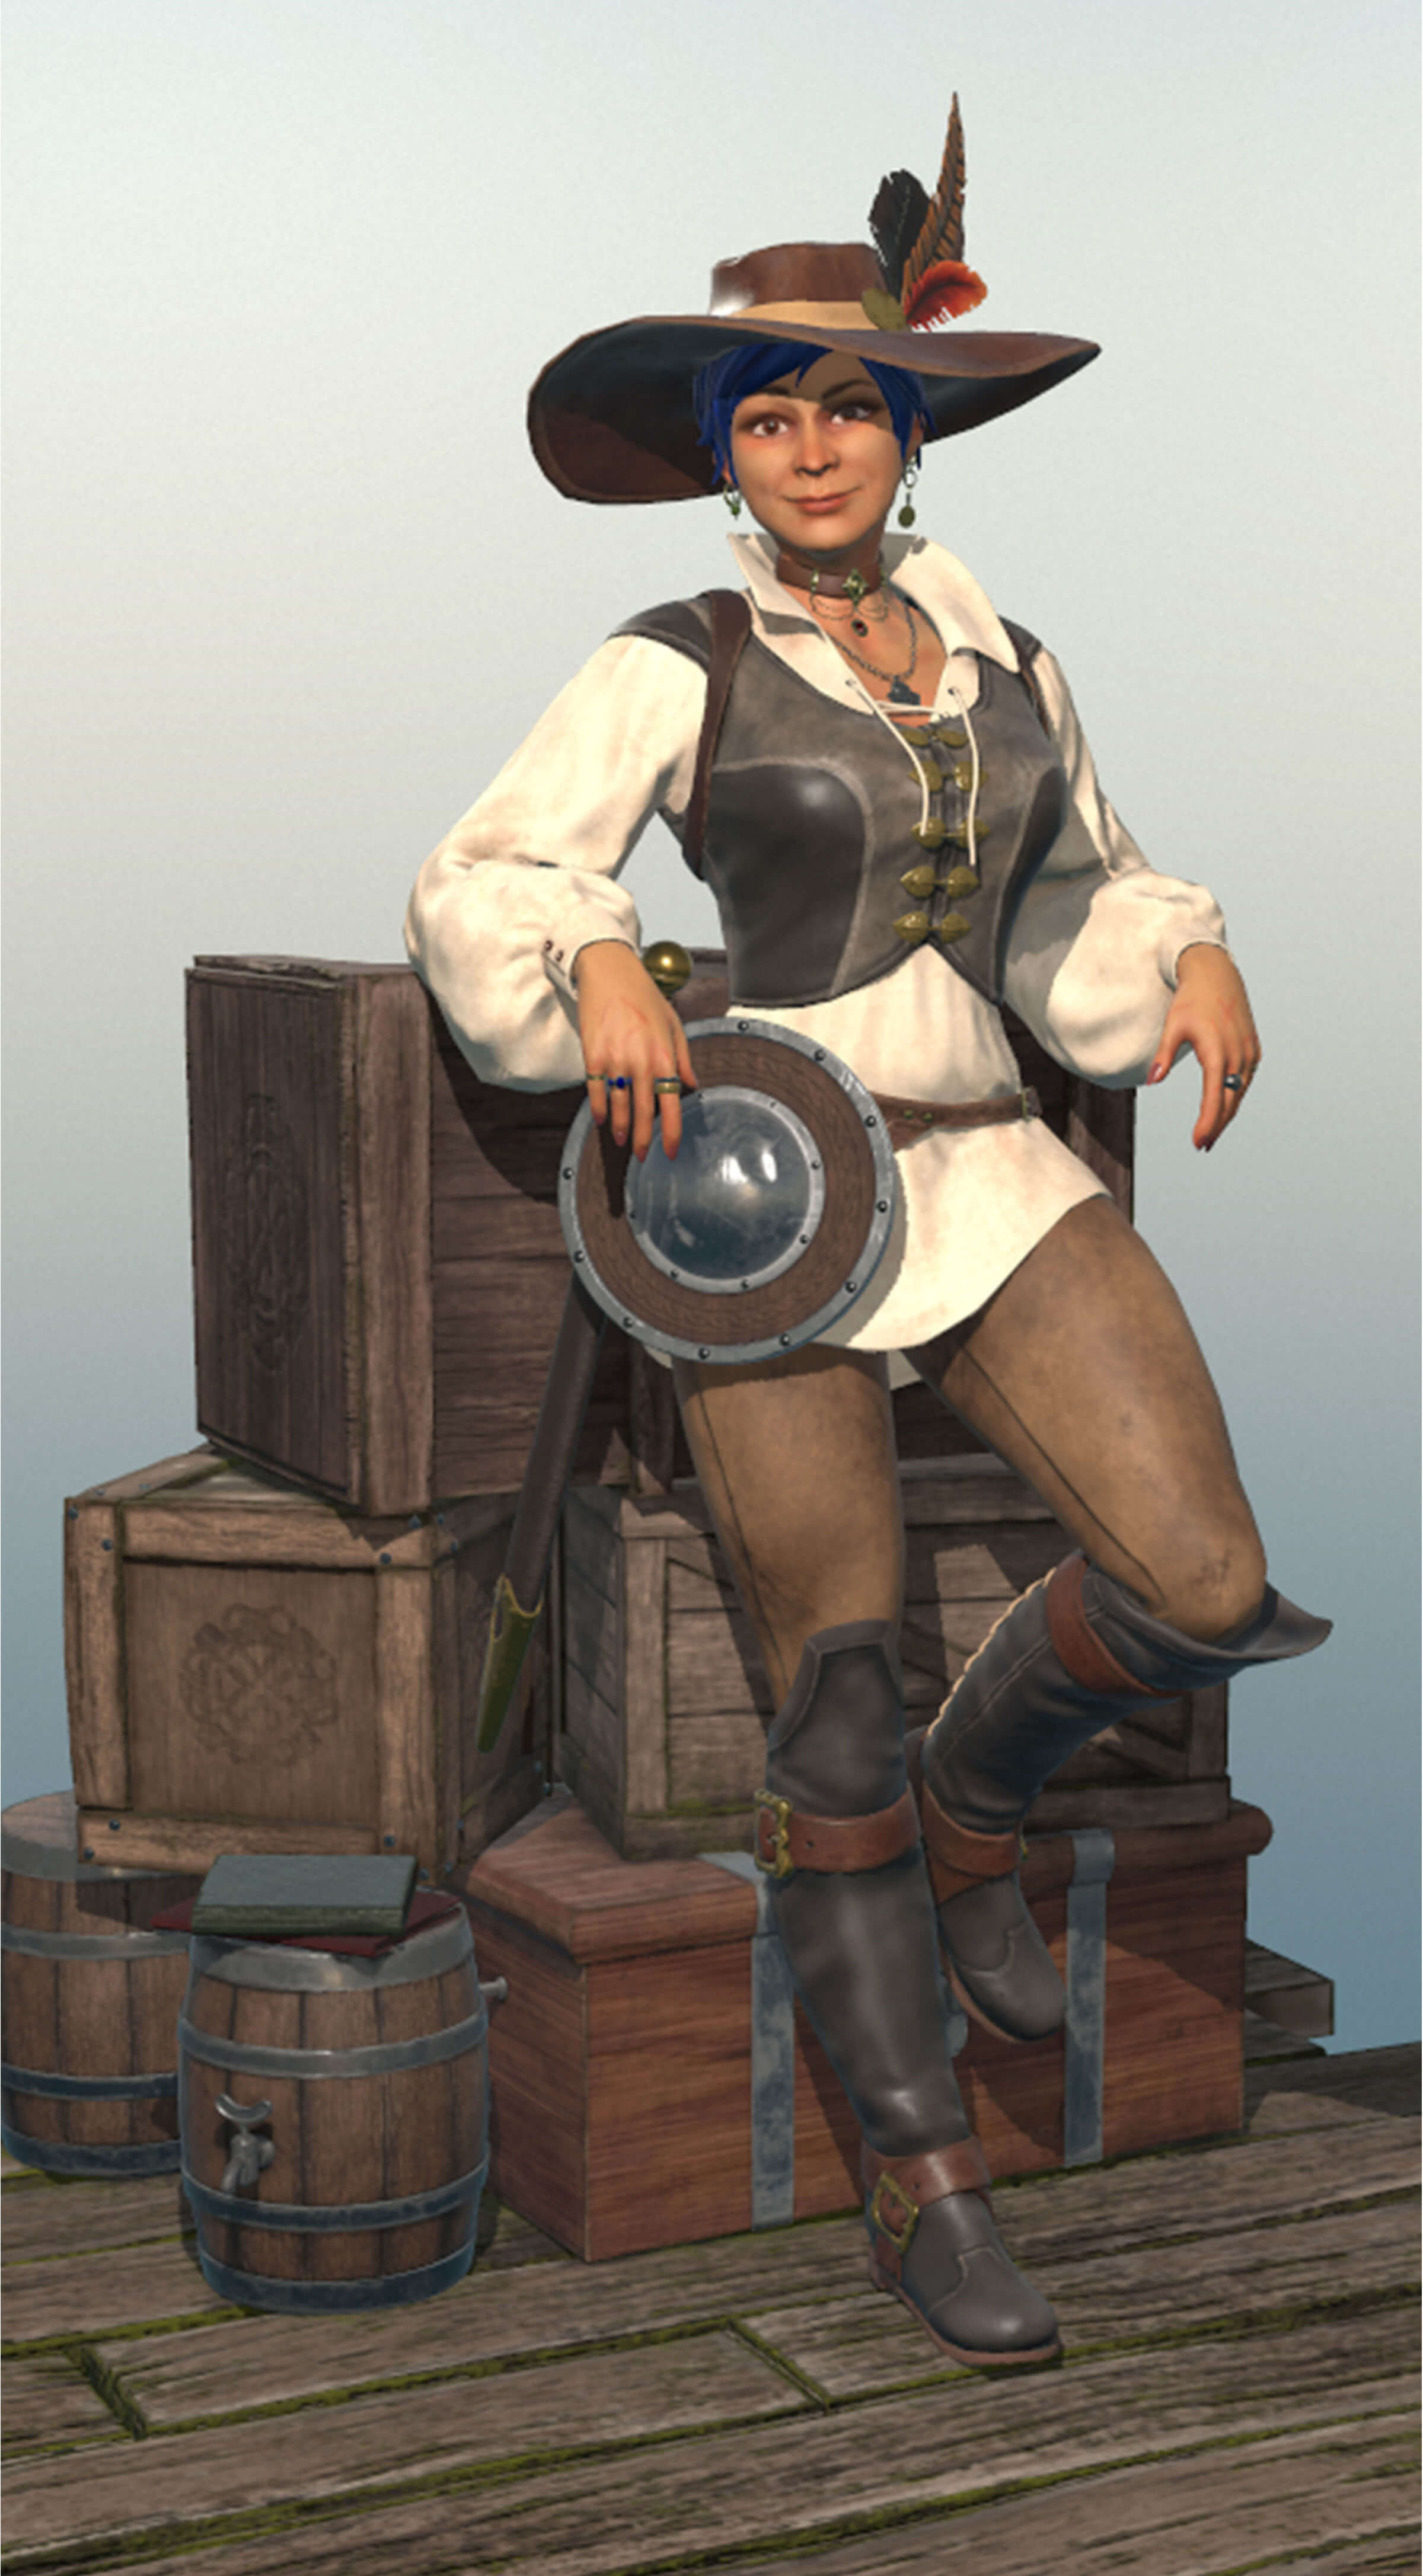 A woman in a plumed hat and cavalier garb leans against wooden crates with a buckler and saber at her hip.